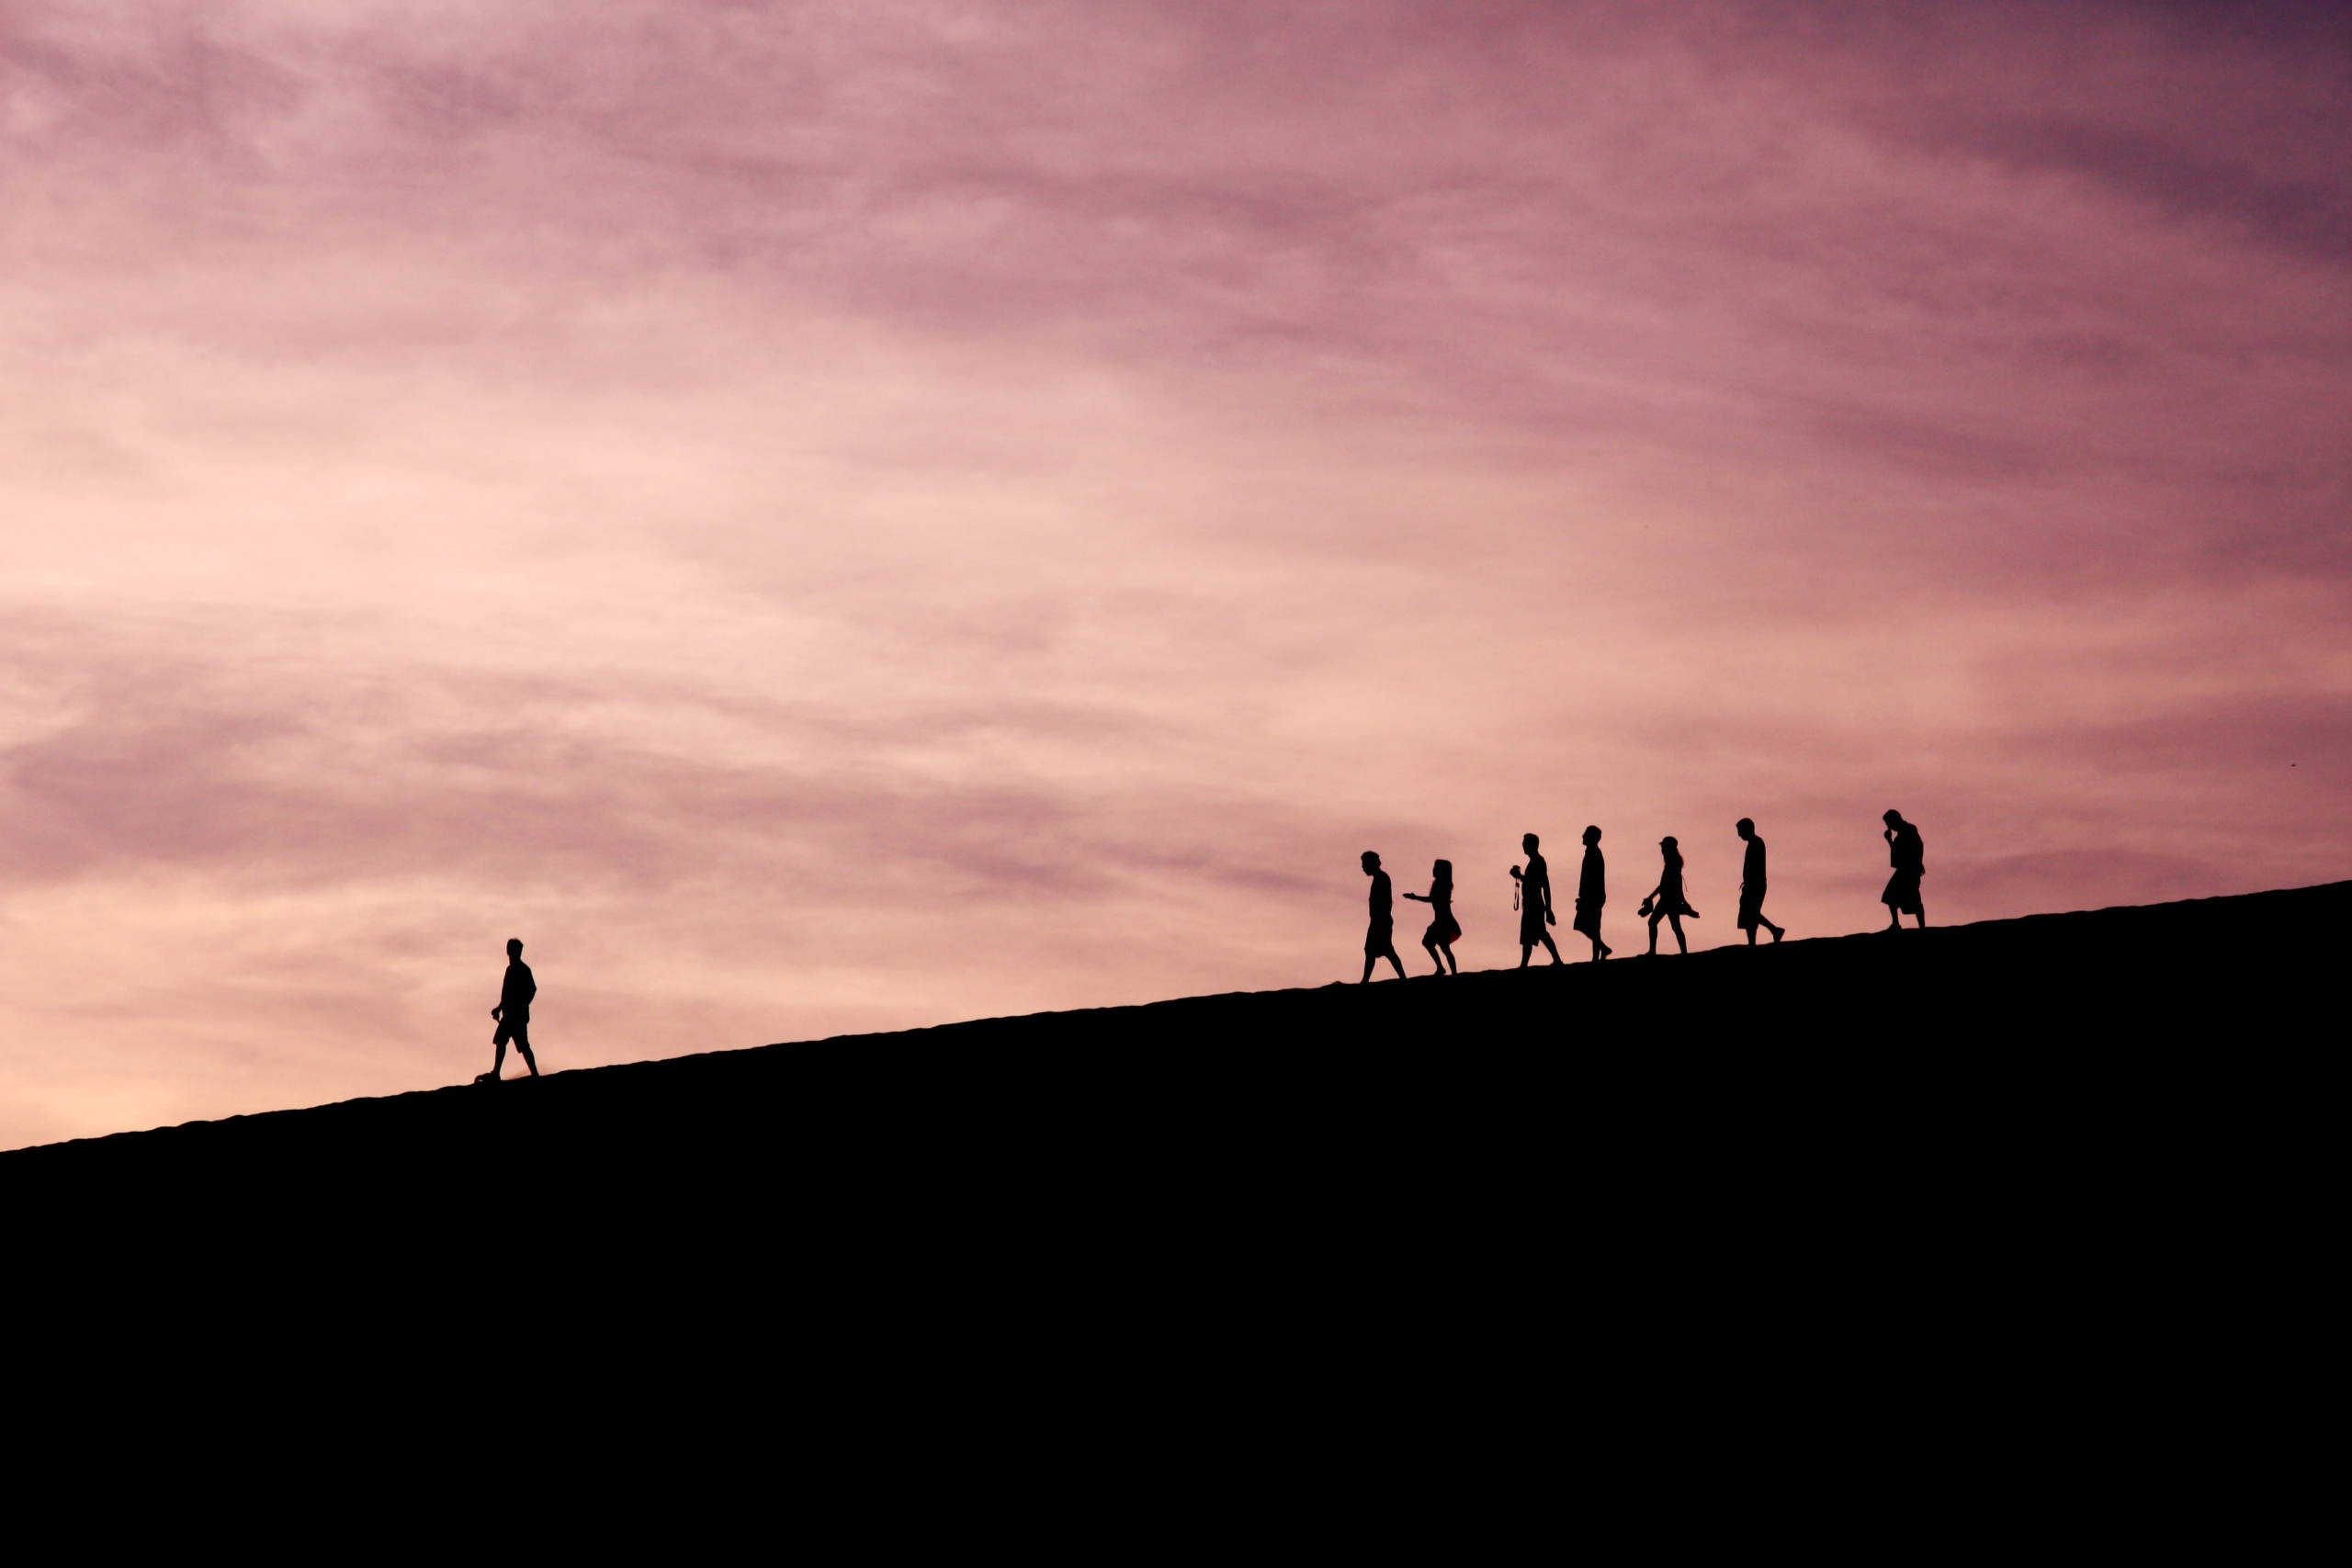 A line of people walking down a hill is shown in silhouette against a purple sky. There is one person far ahead, leading, while 7 others are following behind.